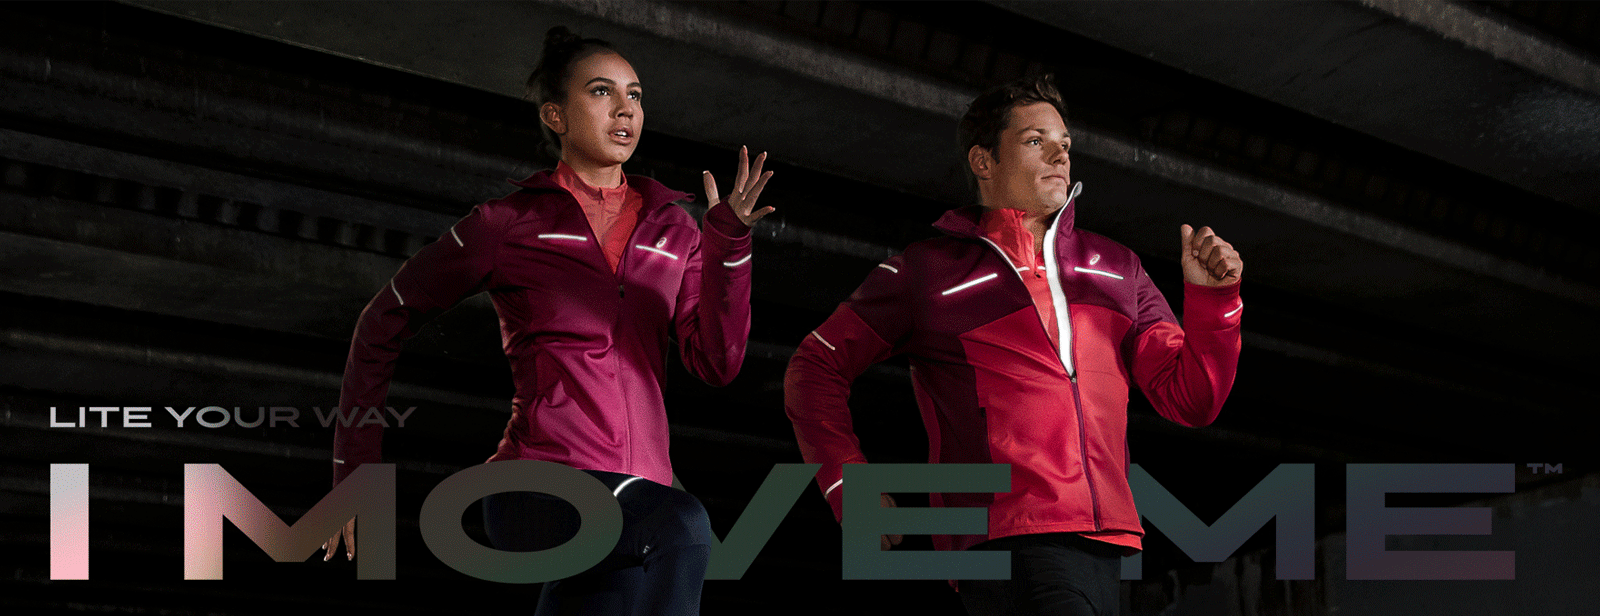 Man and woman running in red Lite Show jackets